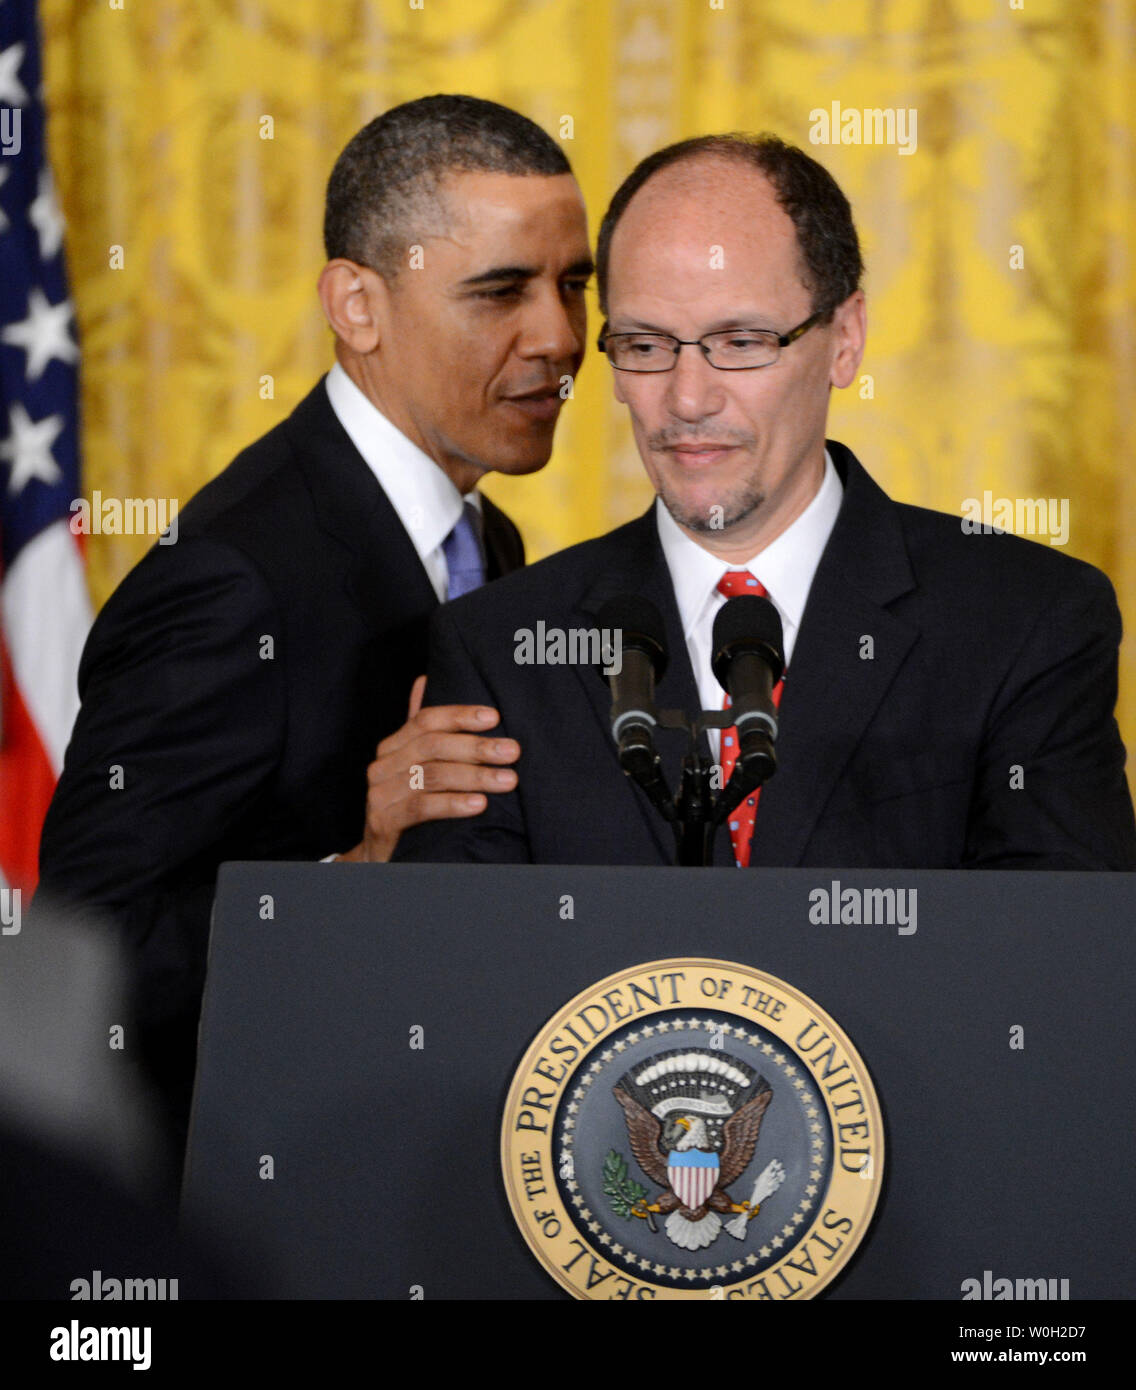 President Barack Obama (L) whispers to Thomas Perez after he nominated him to be the new Secretary of Labor at an event in the East Room of the White House in Washington, DC on March 18, 2013.  Perez is the present U.S. assistant attorney general heading the Justice Department's civil rights division, and if confirmed will take the position recently held by Hilda Solis, who resigned in January.   UPI/Pat Benic Stock Photo